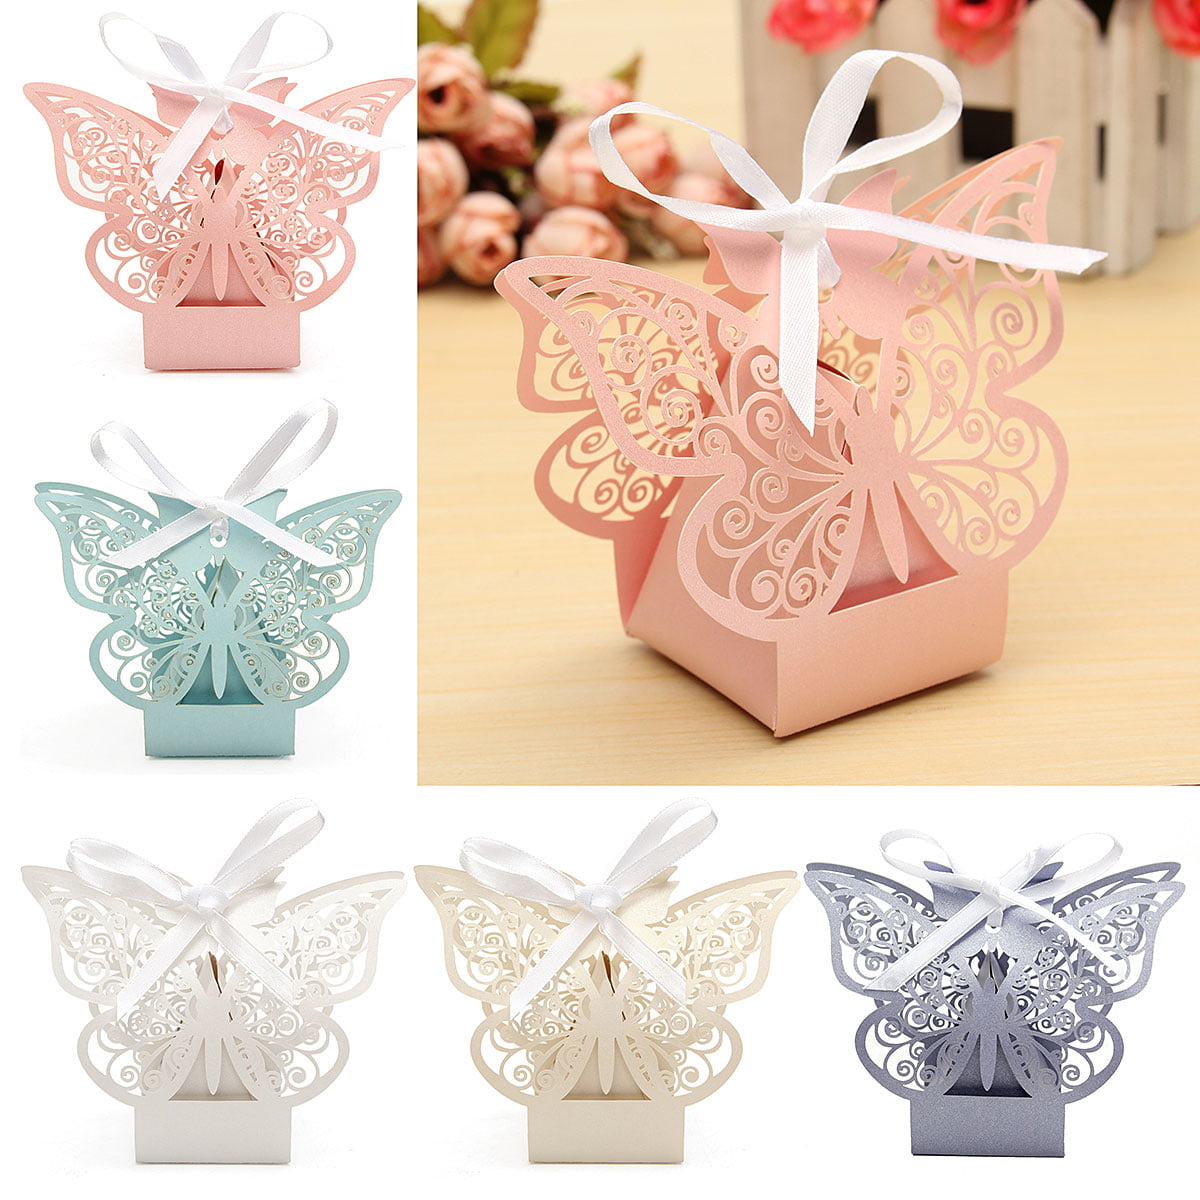 Wedding Favours Gift Boxes 50pcs Butterfly Candy Box Bridal Showers Parties Gifts Table Decoration